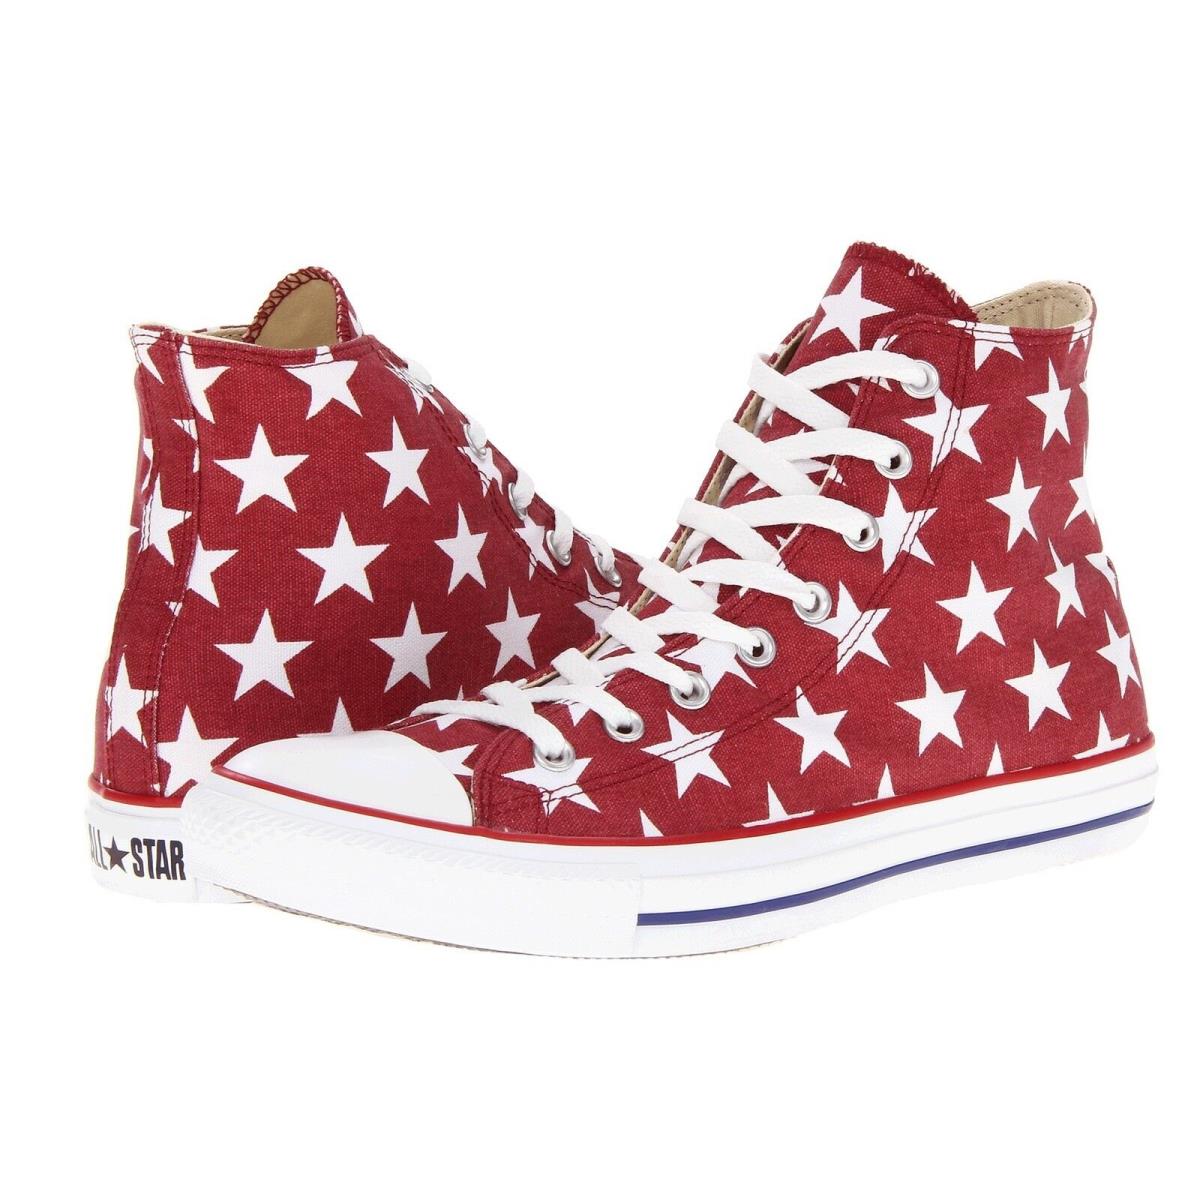 Converse Chuck Taylor All Star Print Hi Top Jester Red White Shoe 8 9 10 11 12 - Red